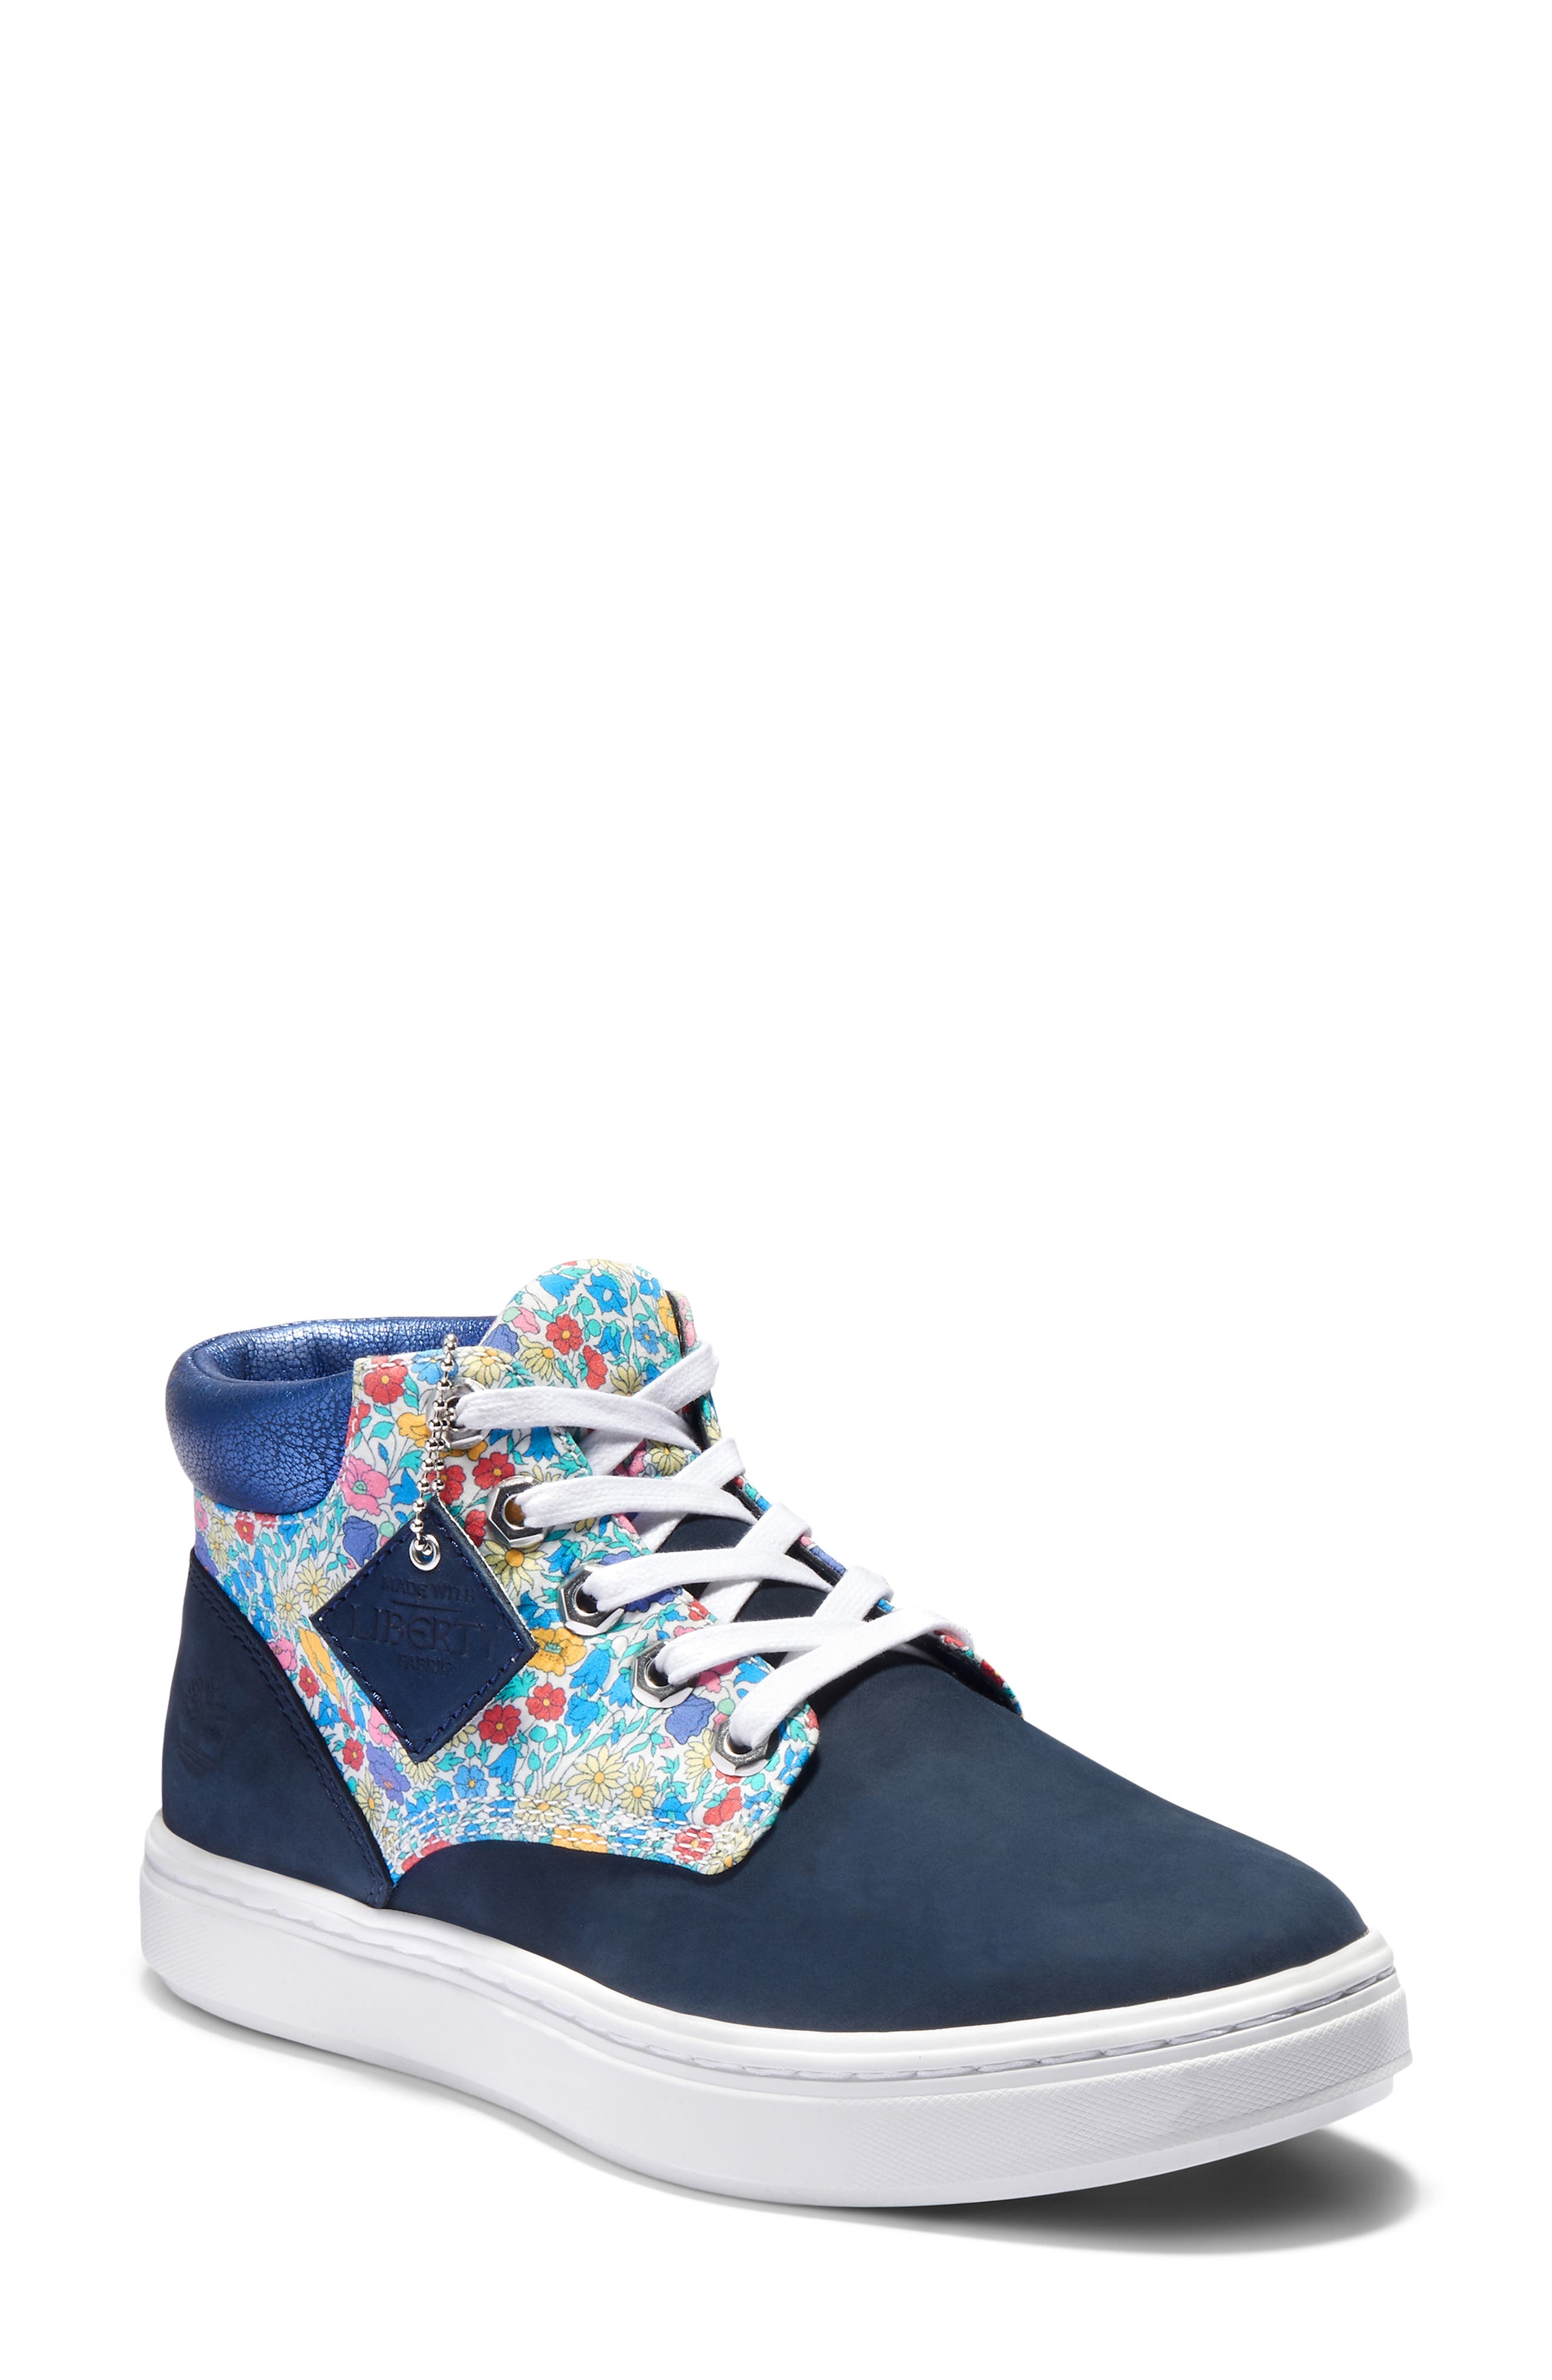 Athletic Shoes | Nordstrom